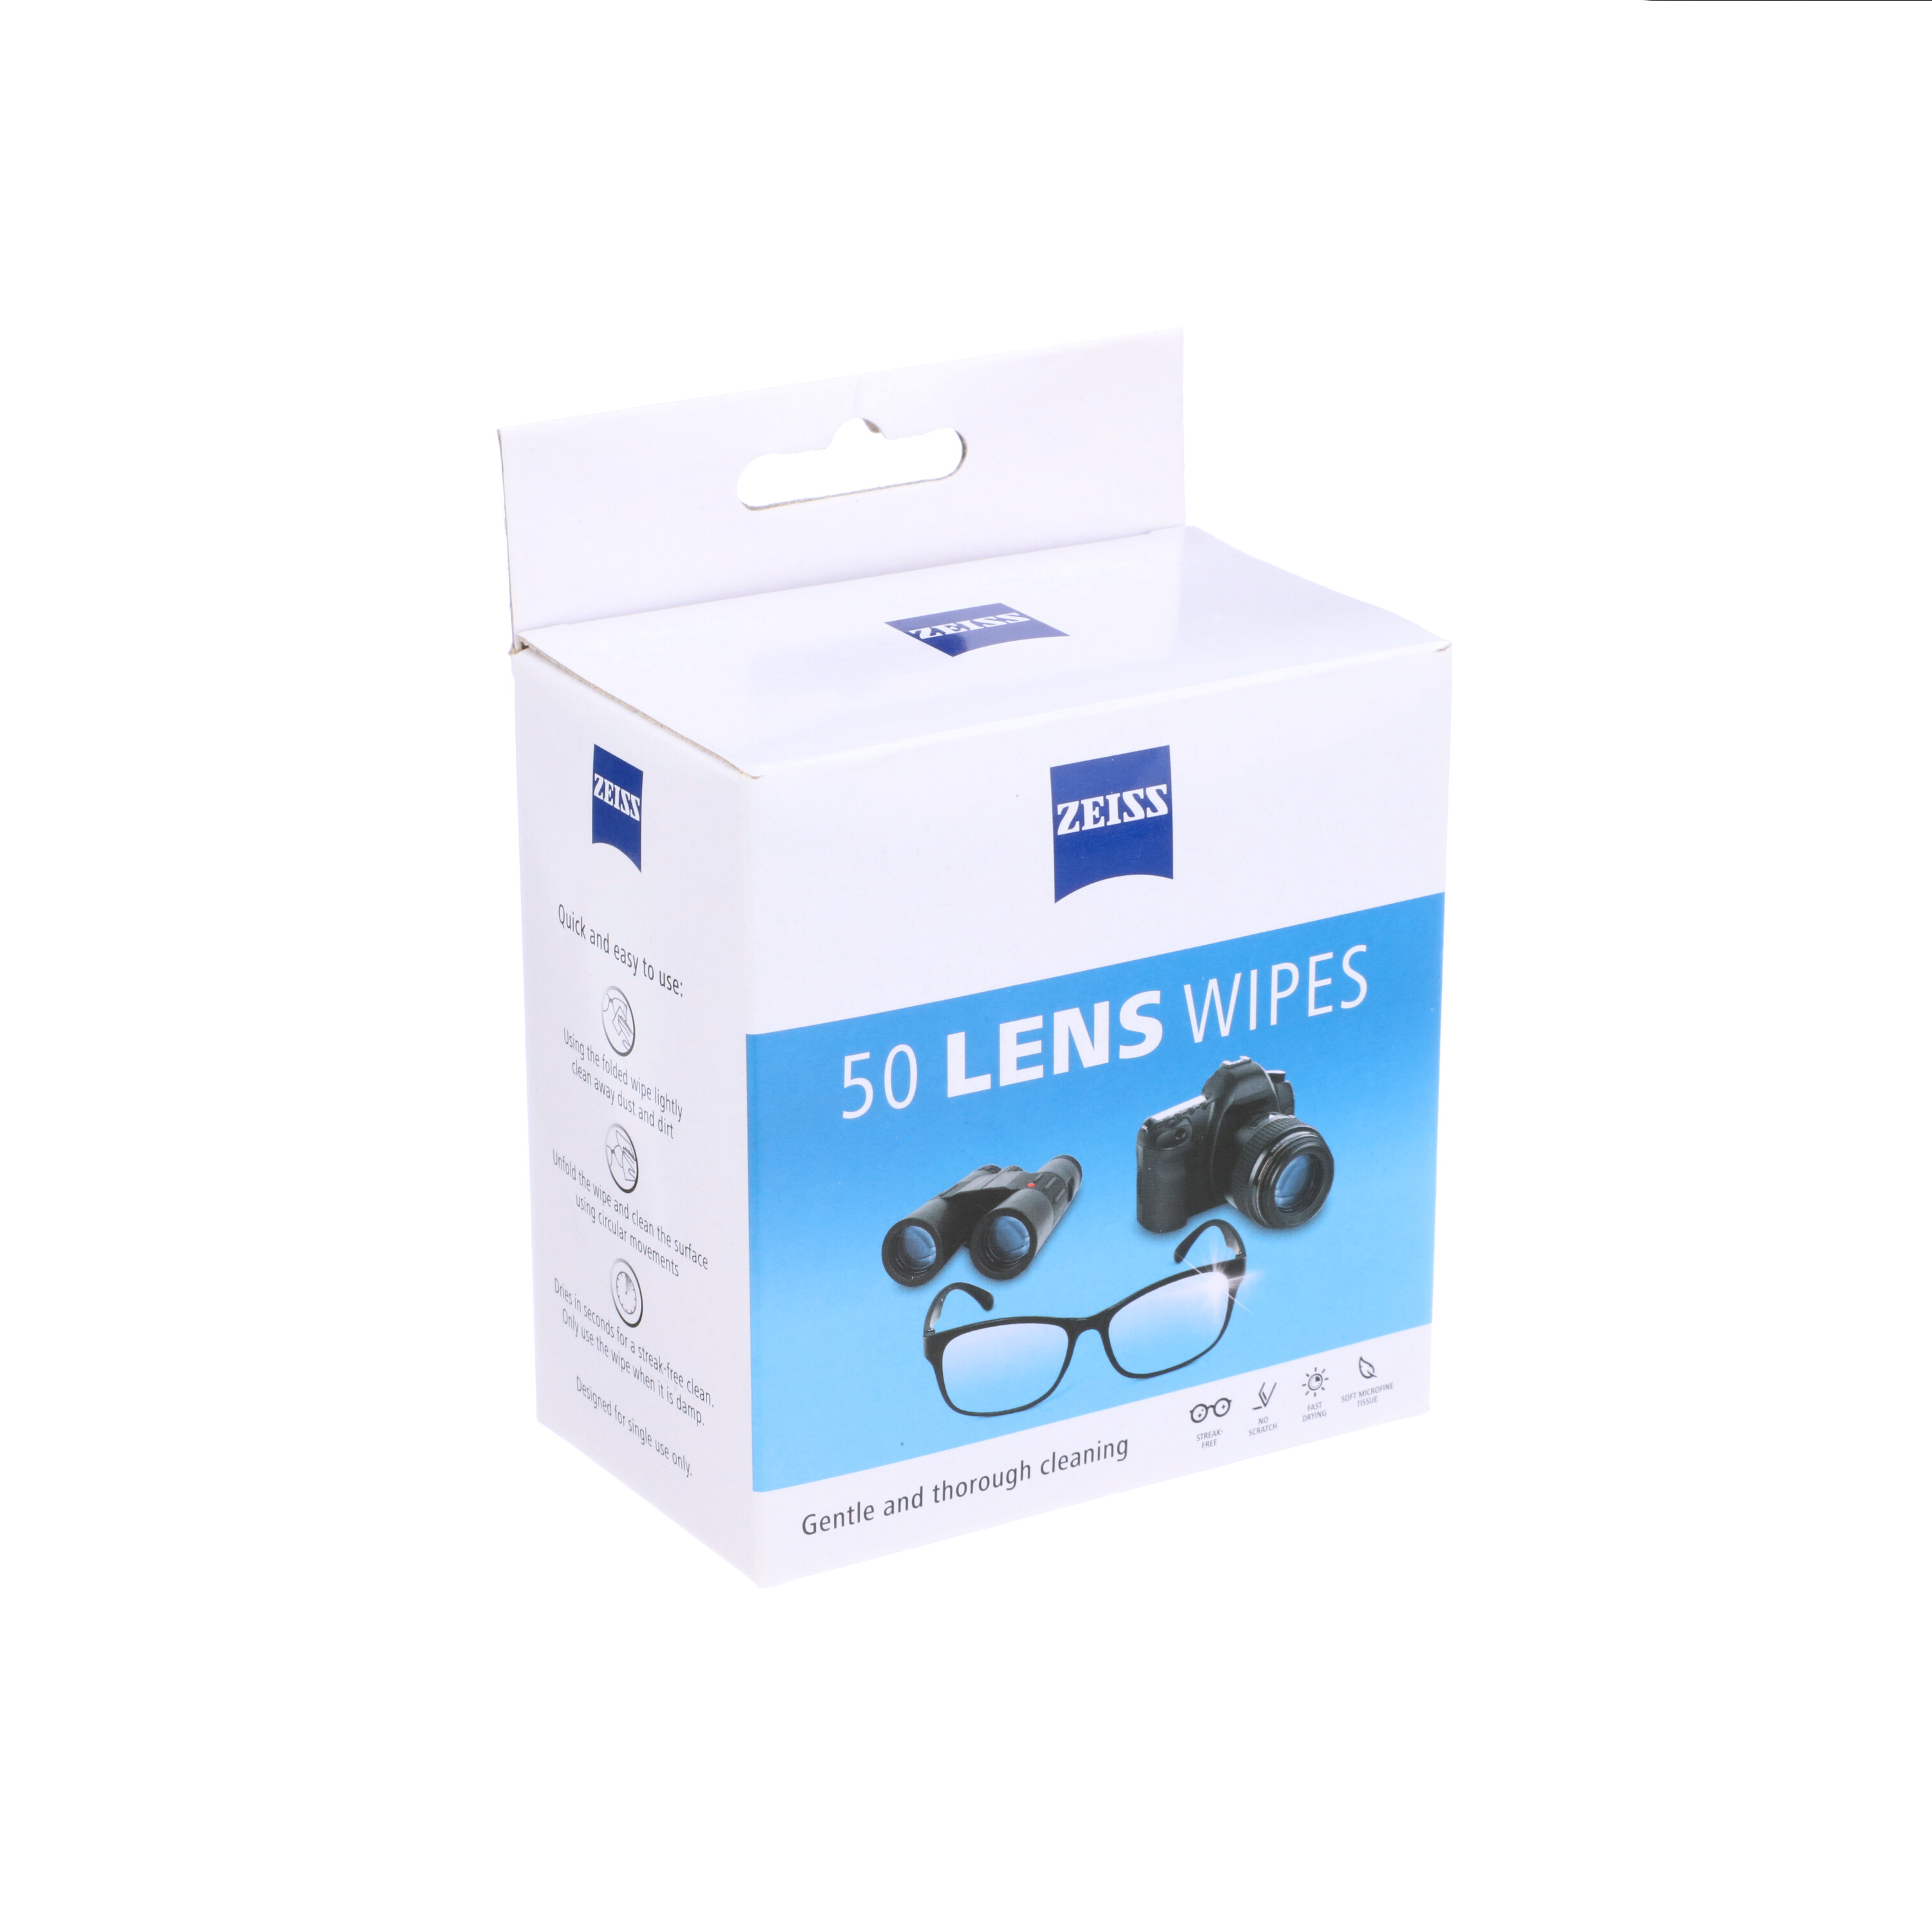 ZEISS Gentle and Thorough Cleaning Eyeglass Lens Cleaner Wipes, 225 Count